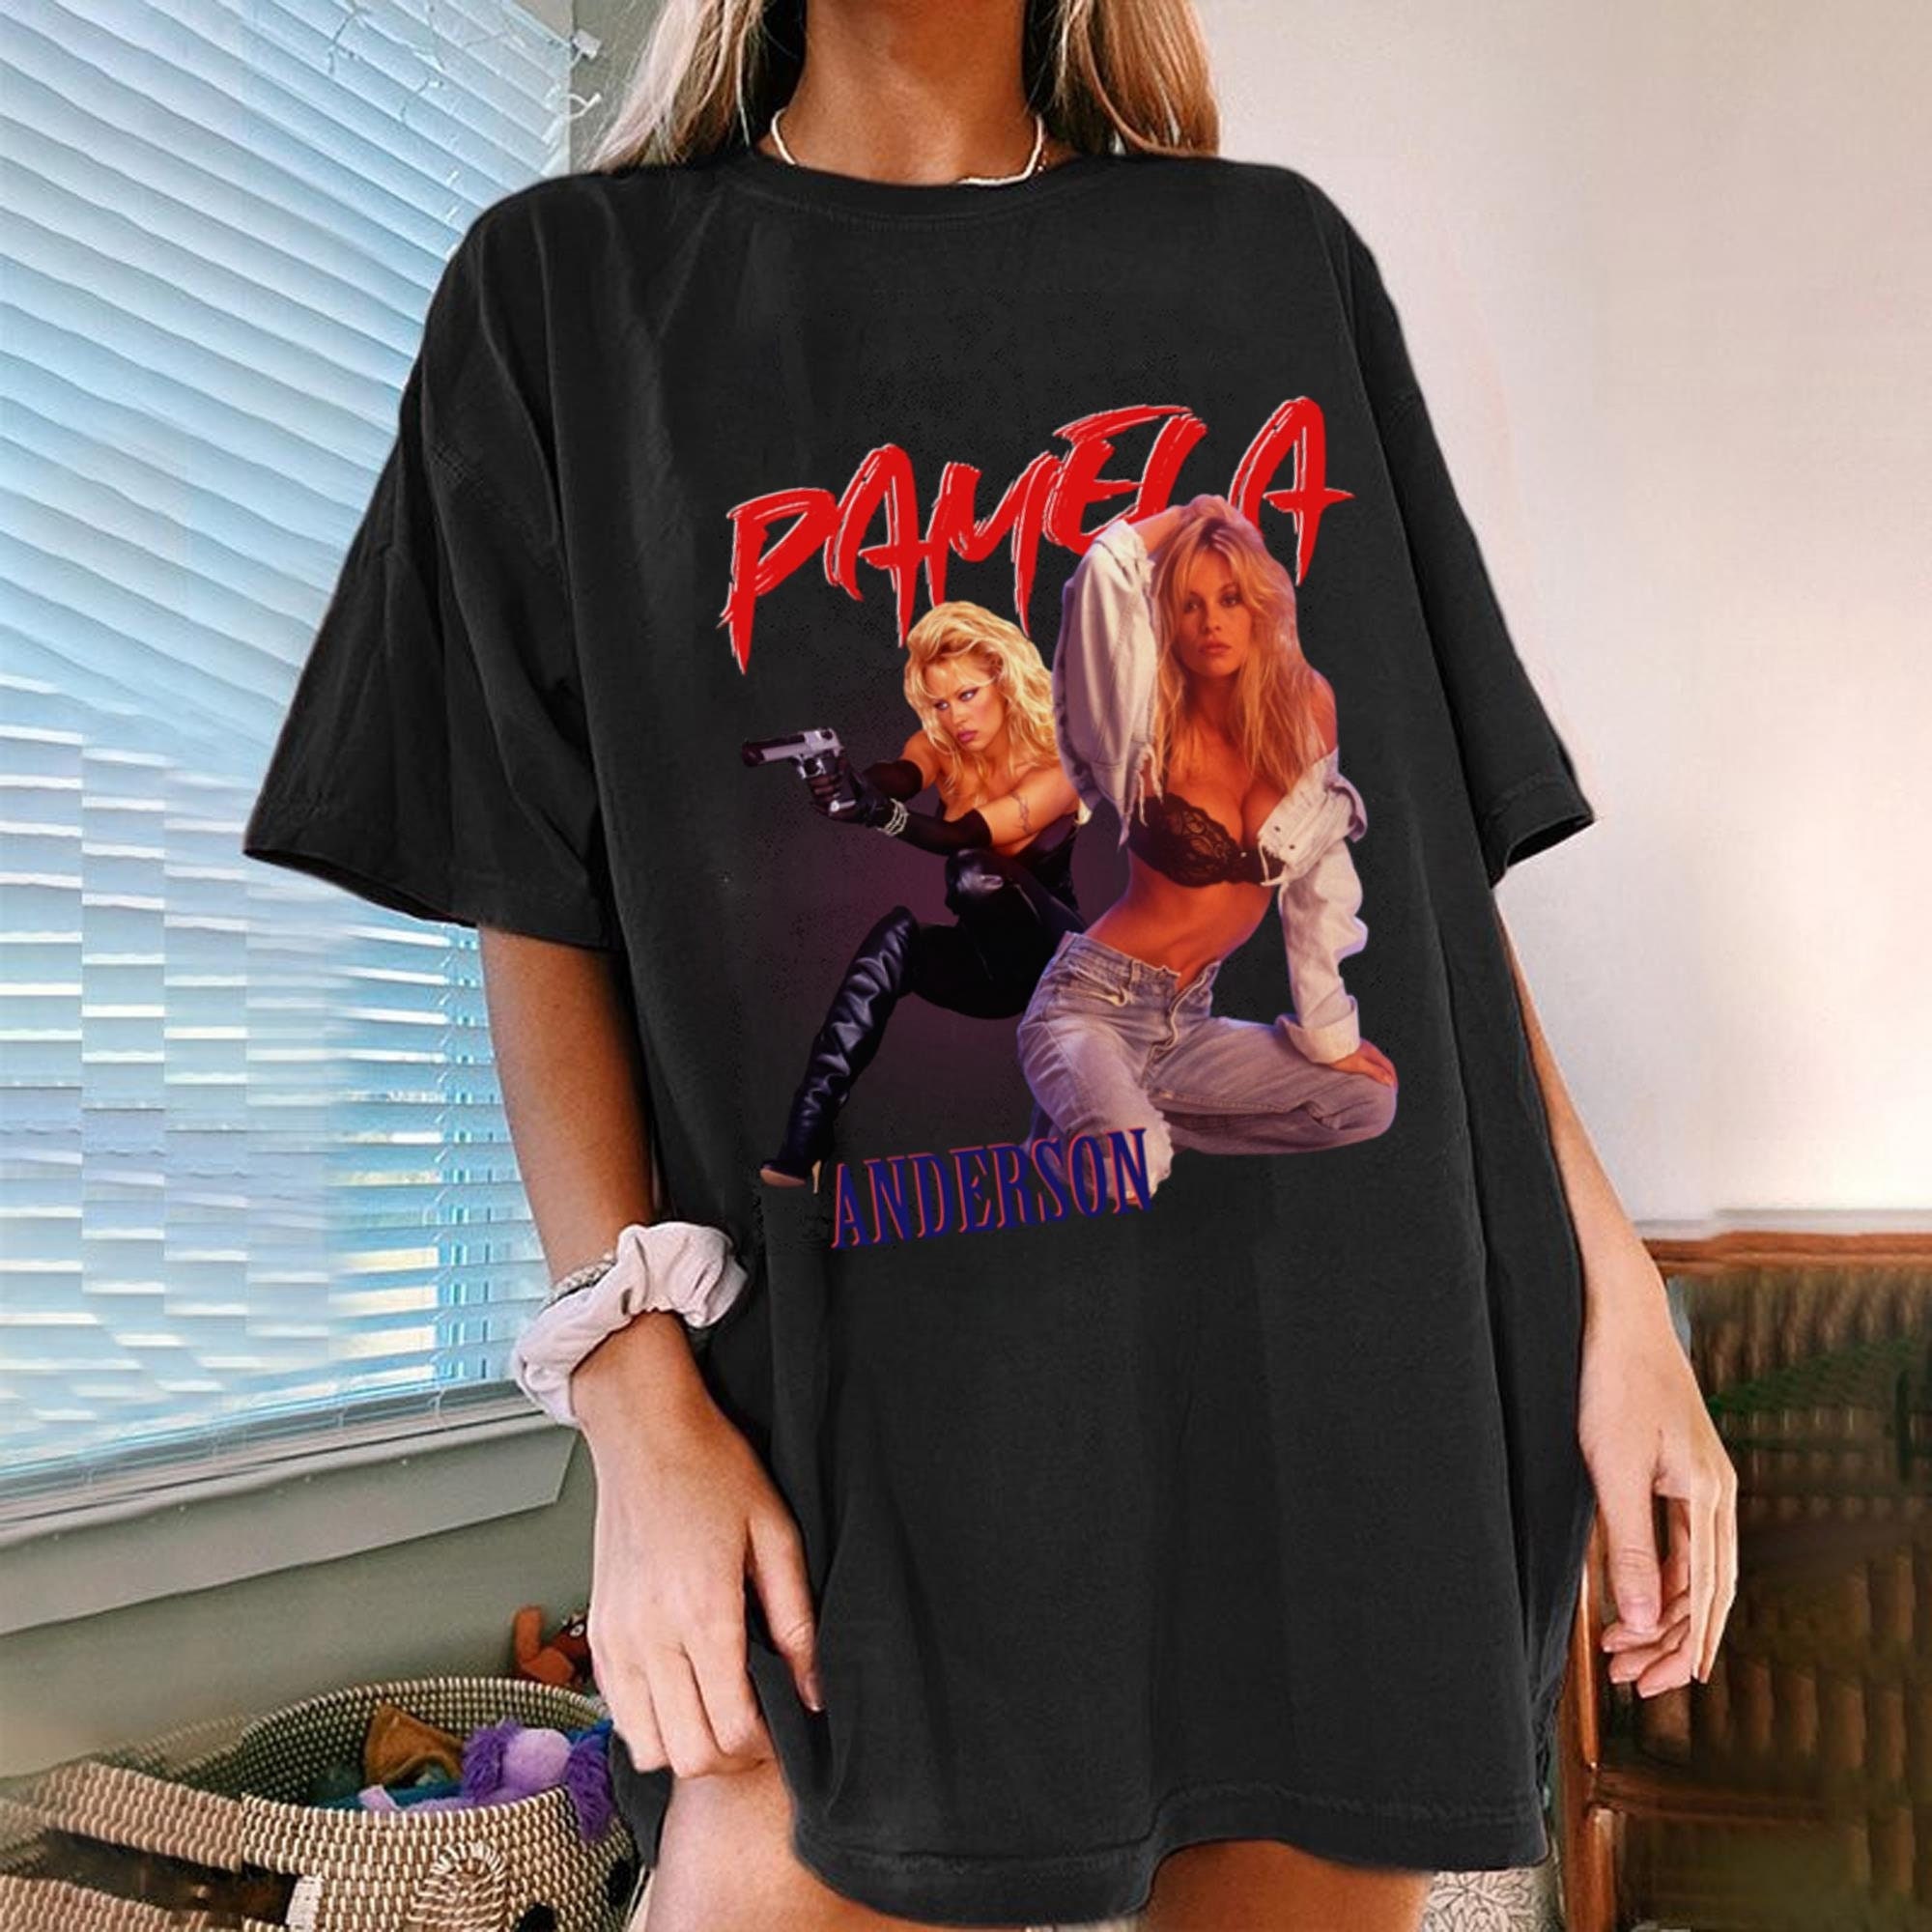 Discover Barb Wire Pamela Lee Anderson shirt